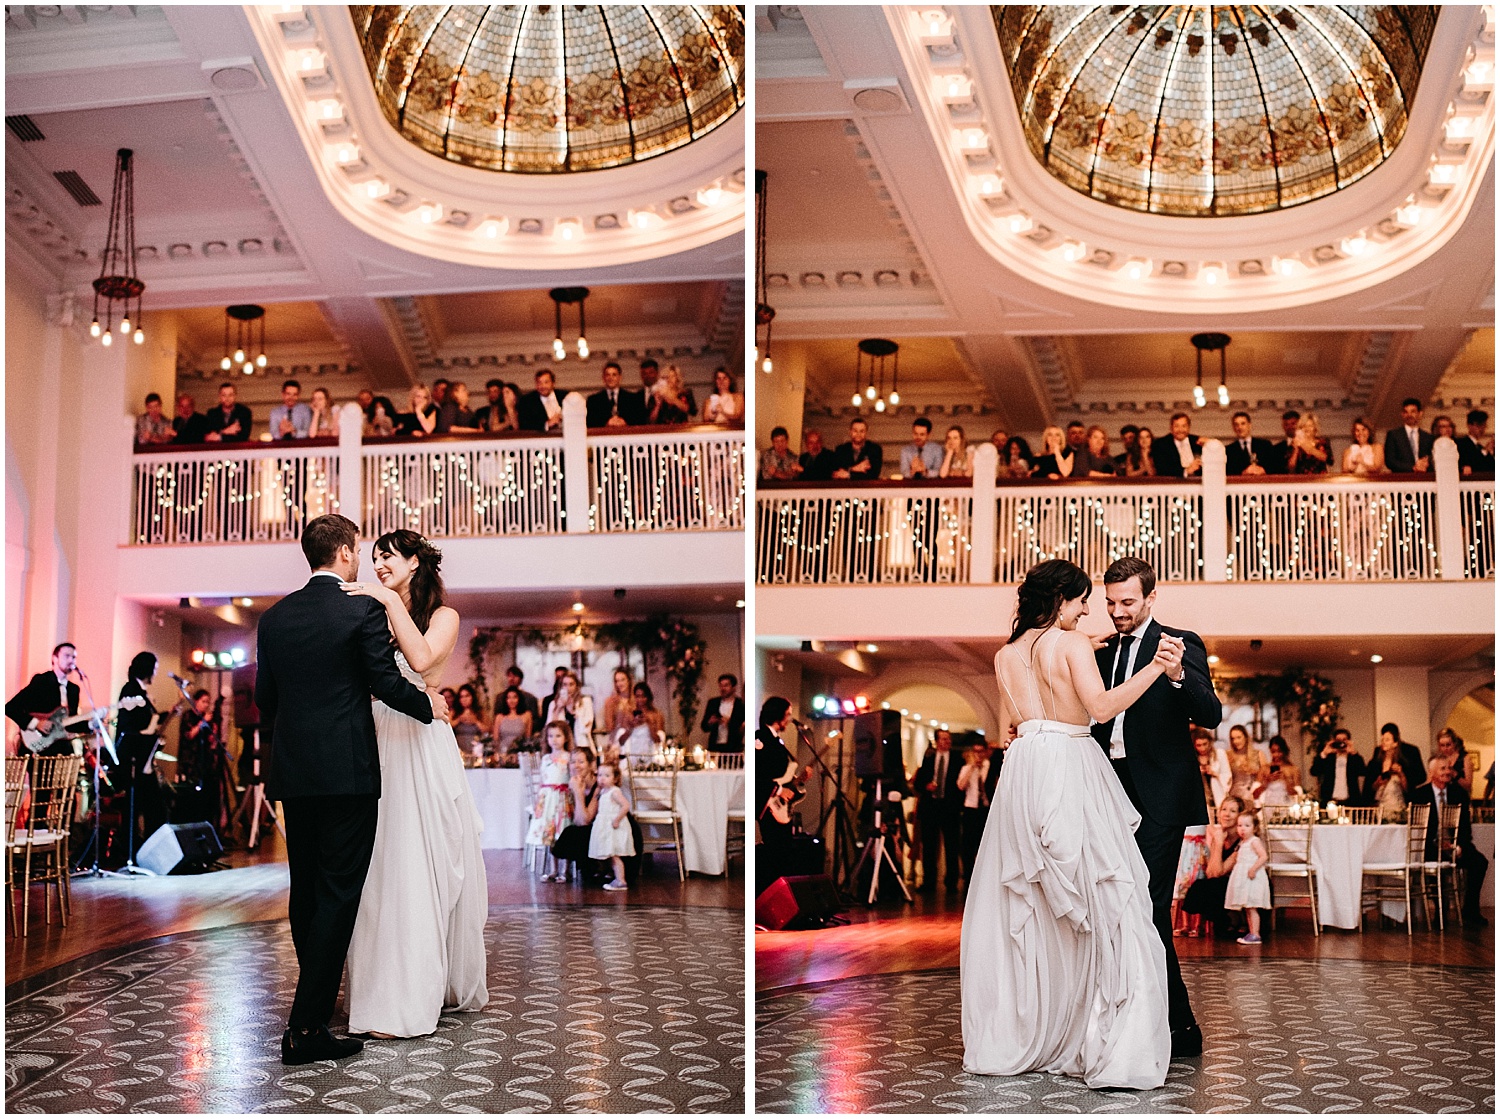 first dance photos at the permanent downtown urban wedding reception